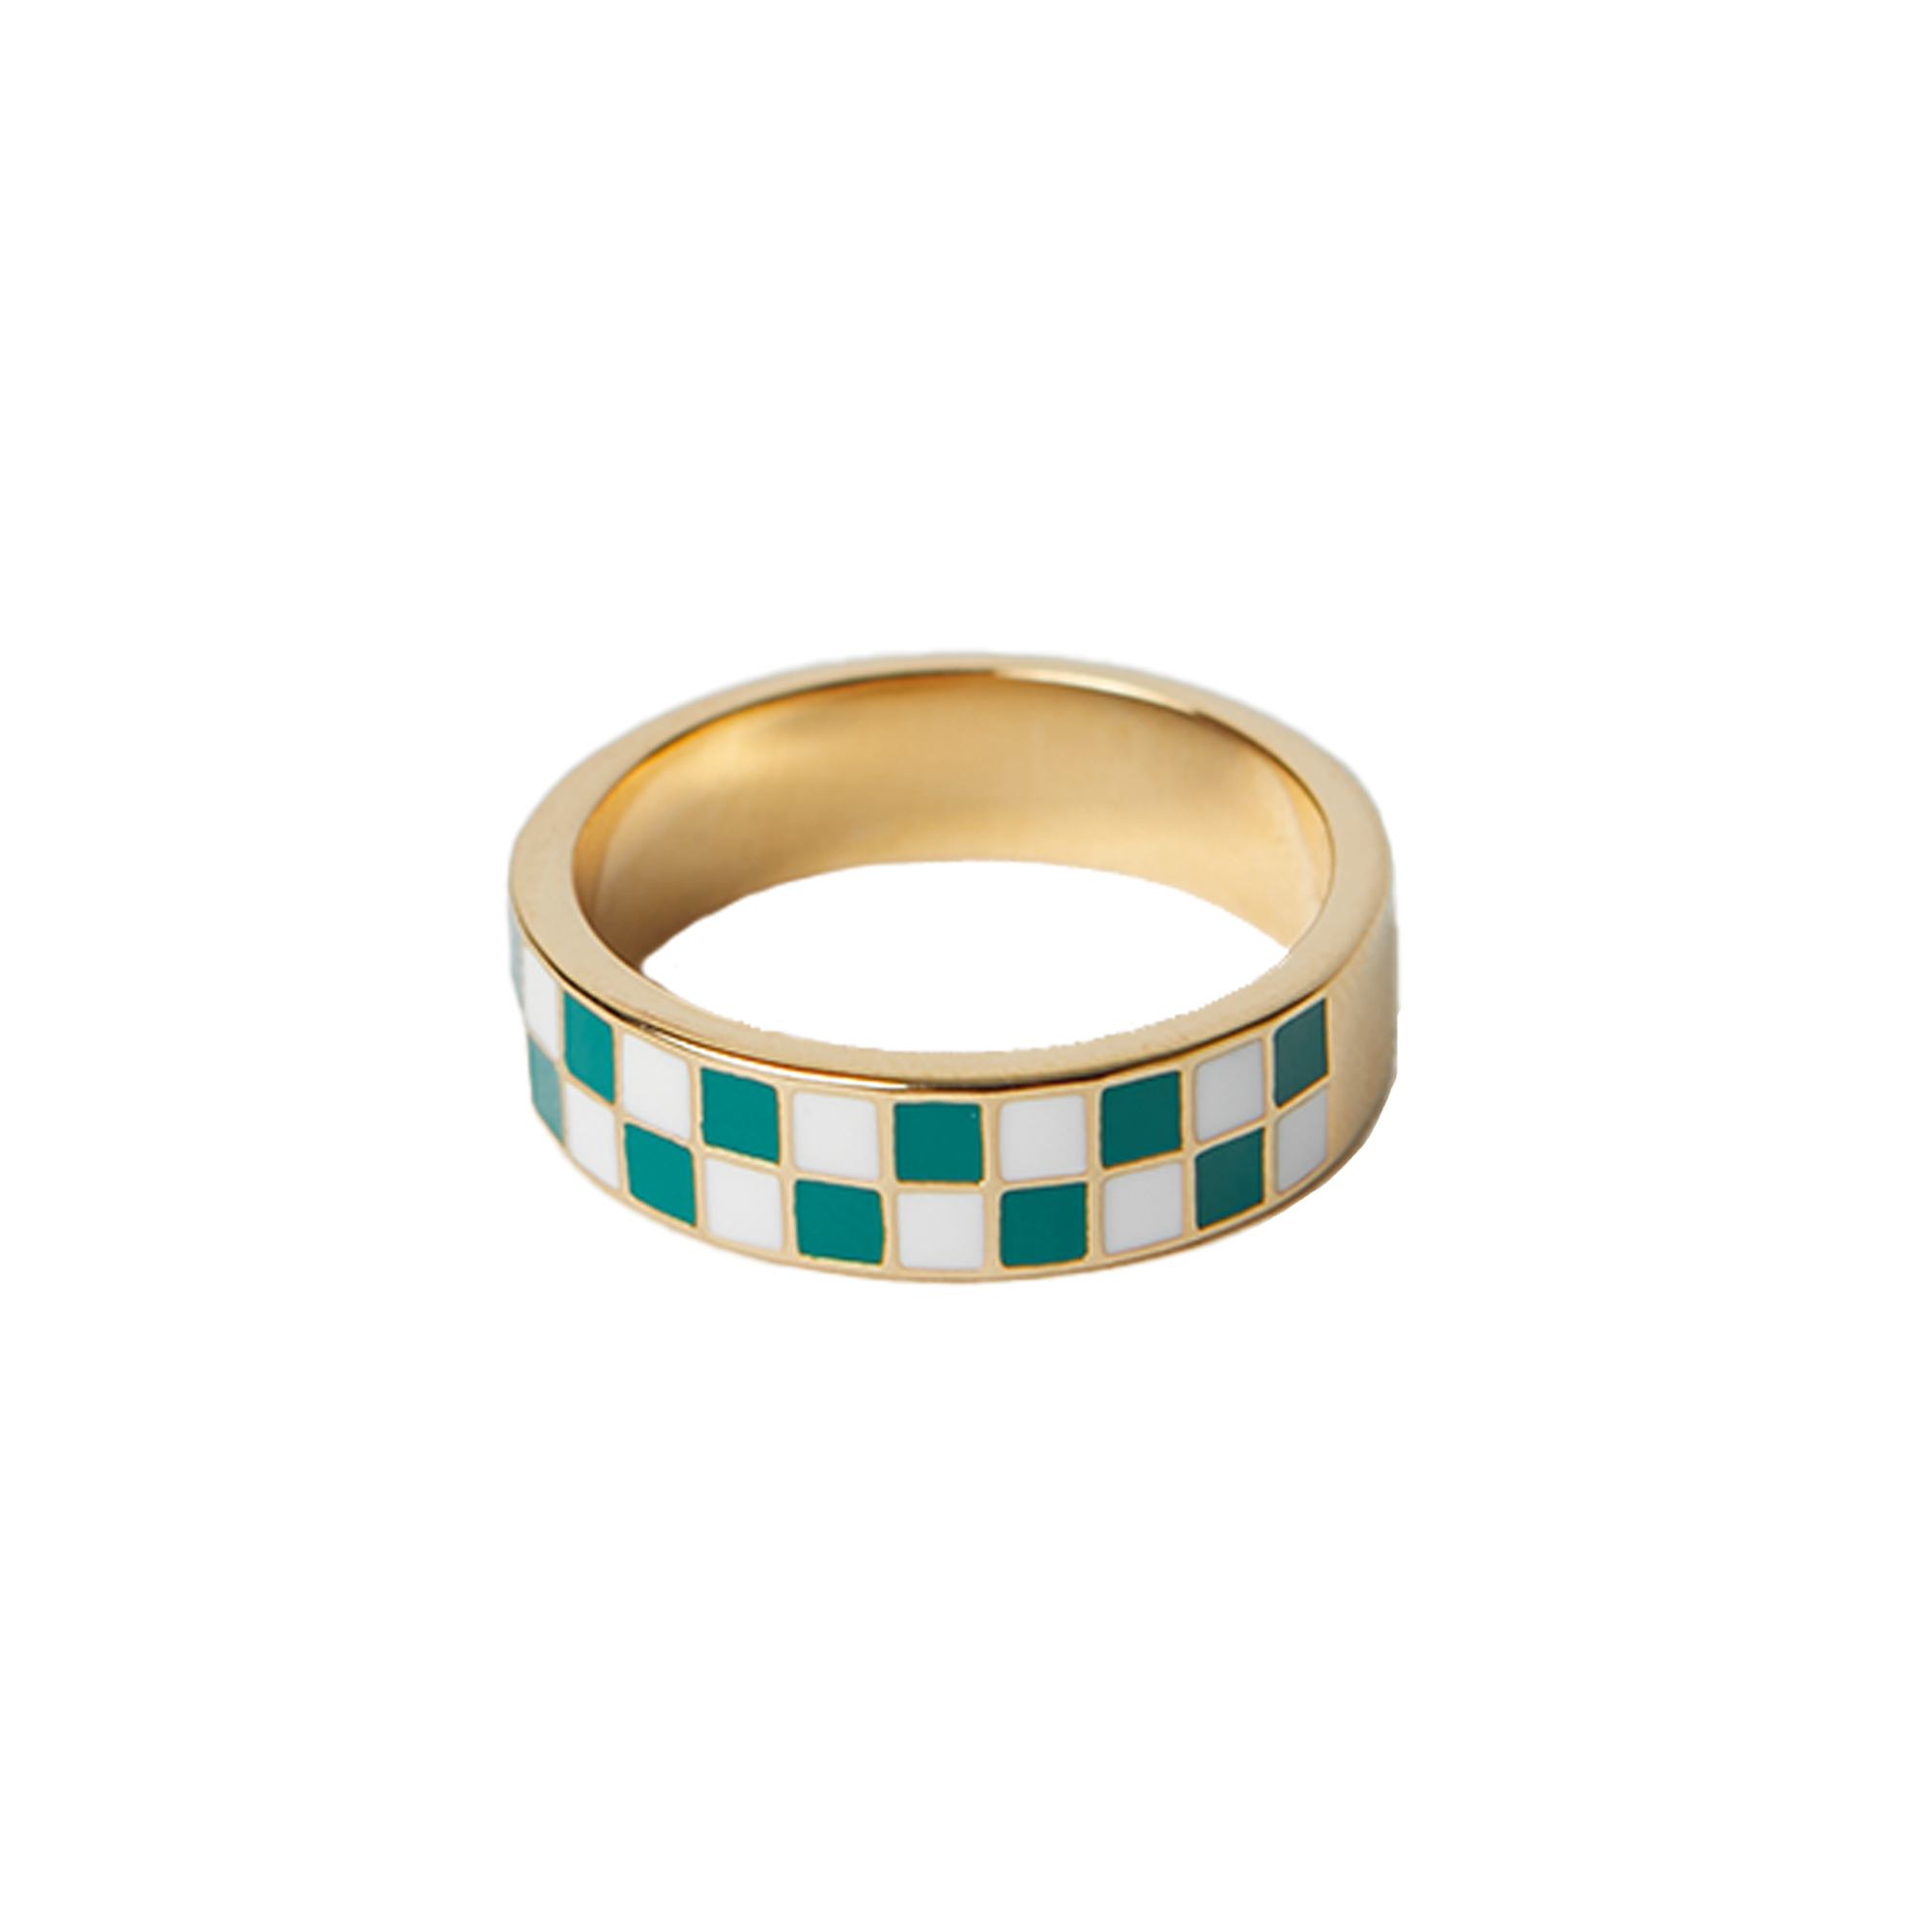 THE CHECKERED RING